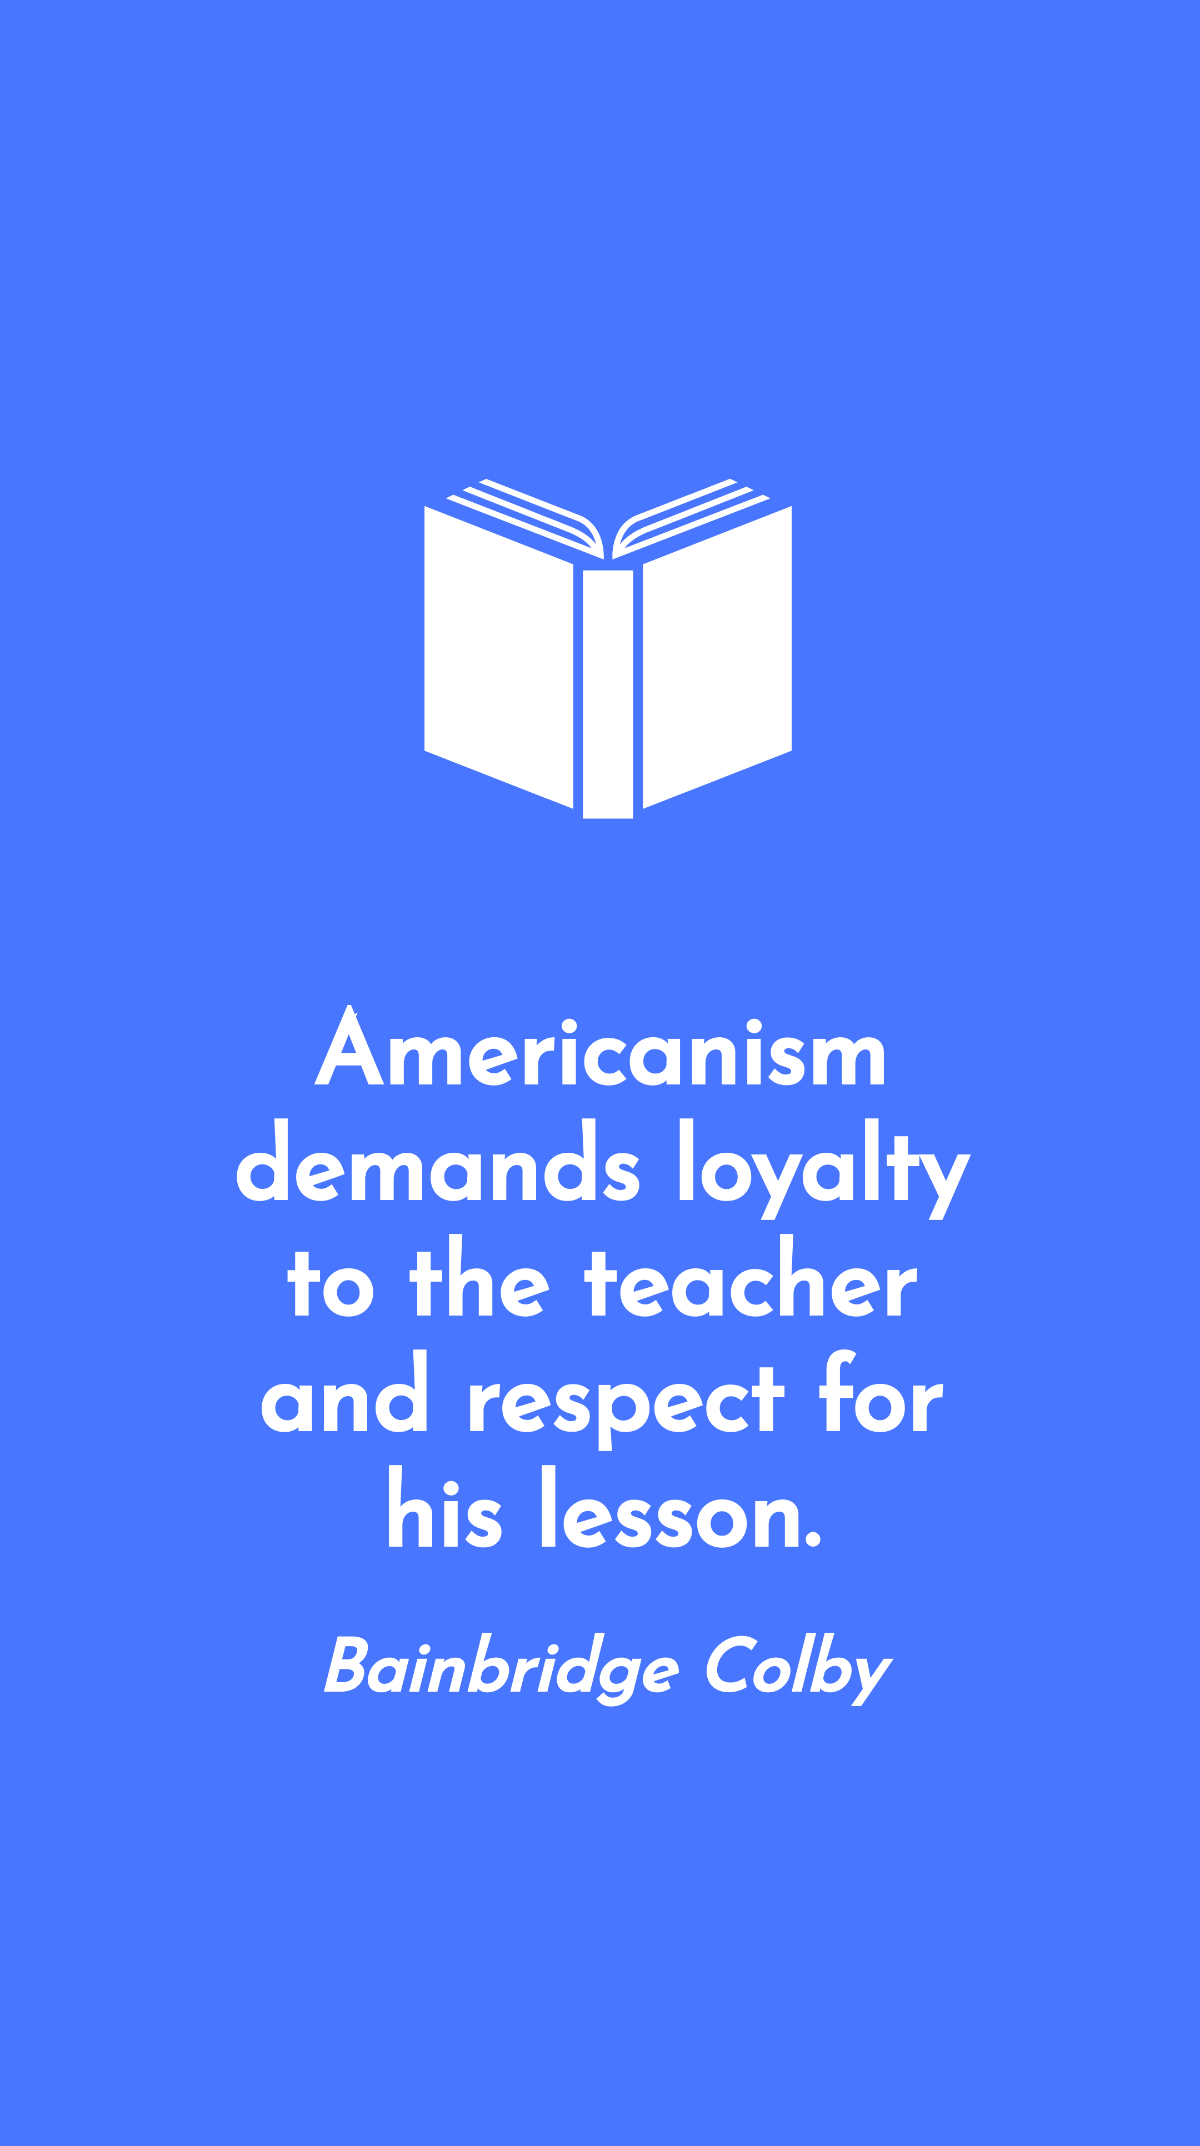 Free Bainbridge Colby - Americanism demands loyalty to the teacher and respect for his lesson. Template